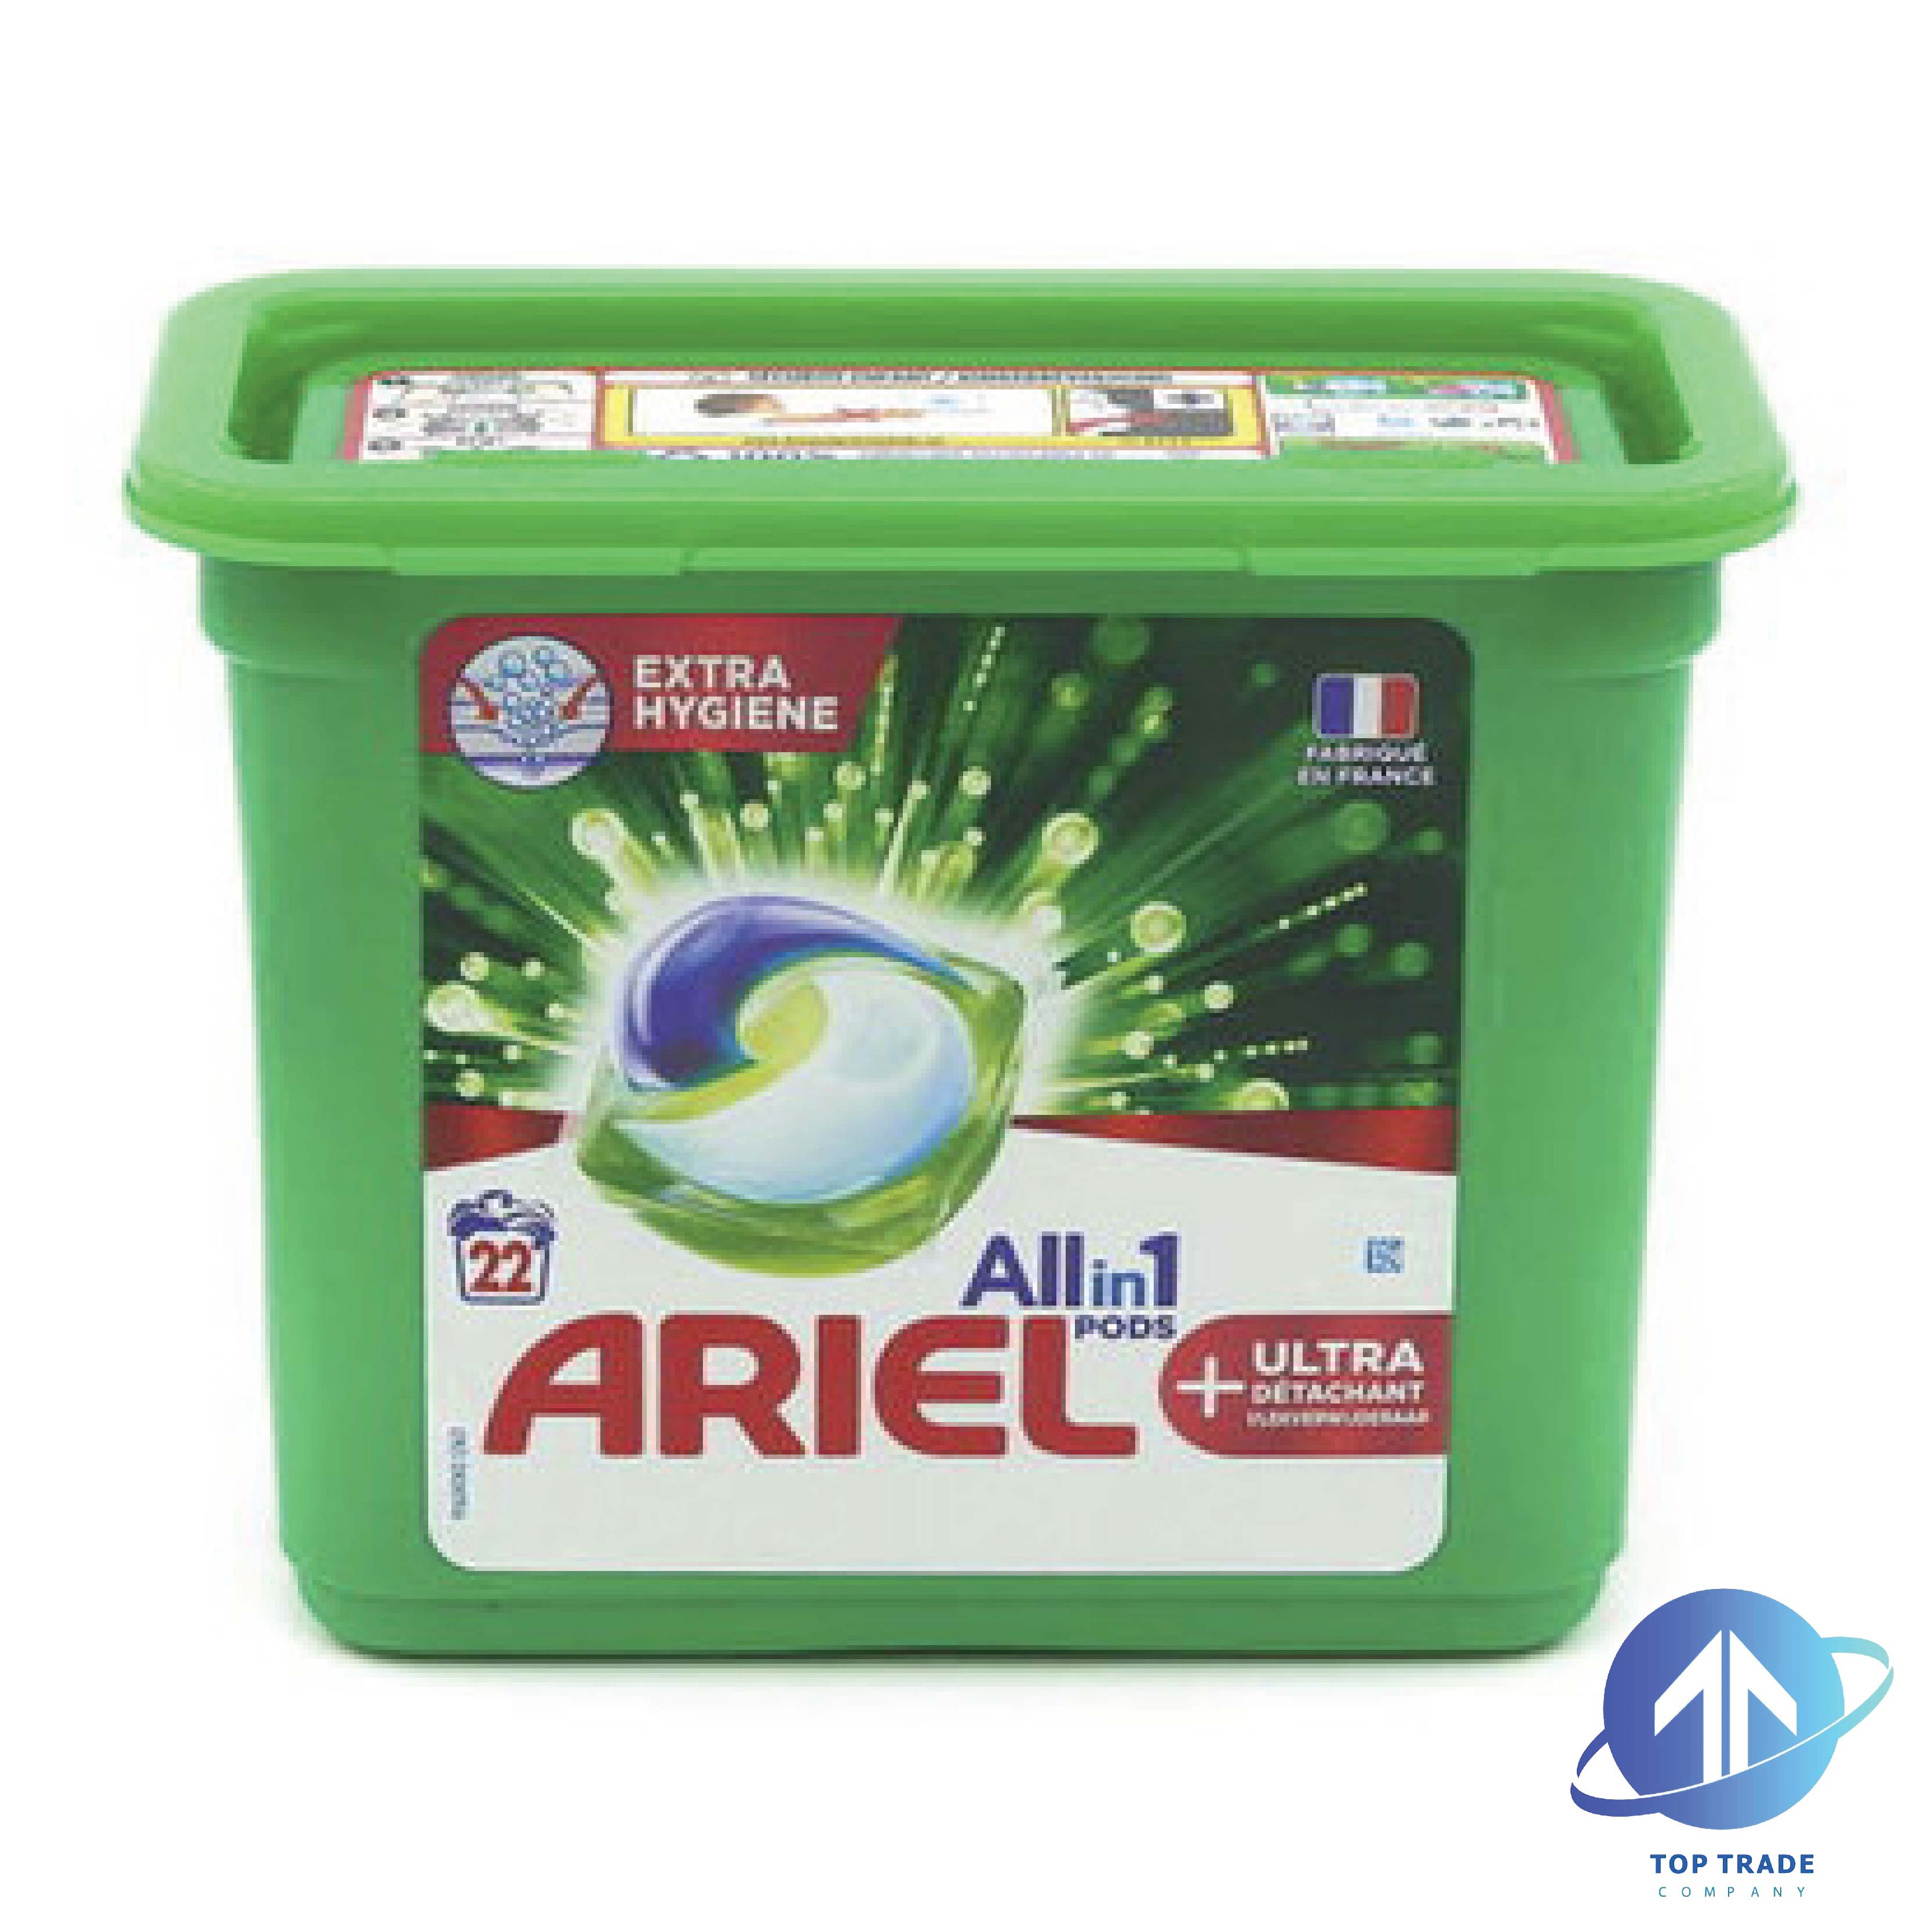 Ariel Pods All in1 22sc ultra stain remover